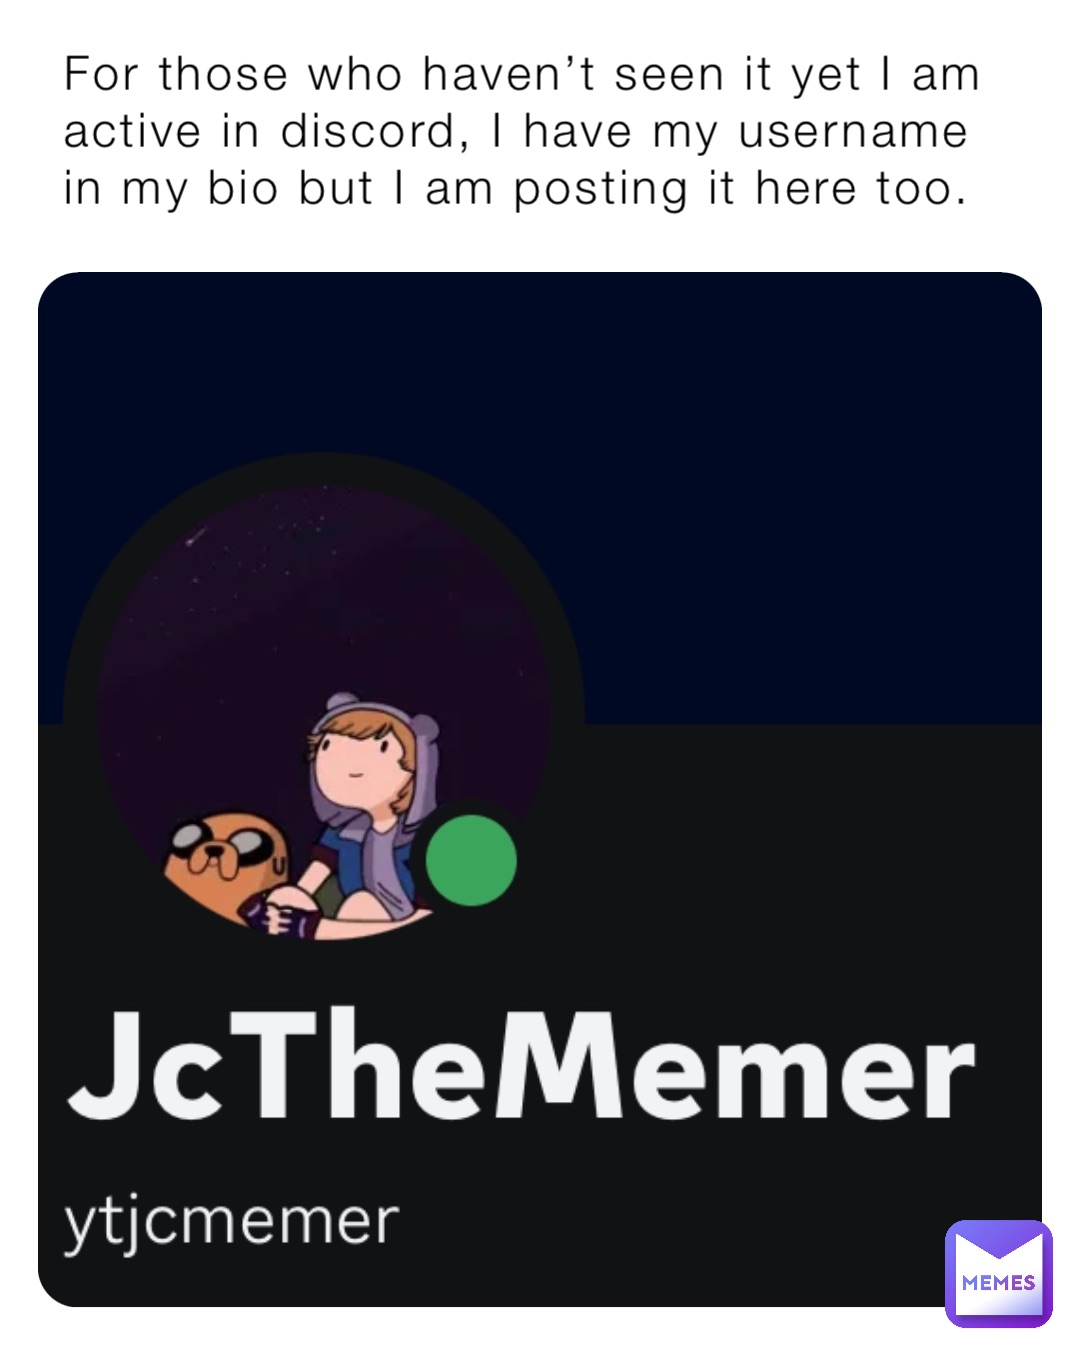 For those who haven’t seen it yet I am active in discord, I have my username in my bio but I am posting it here too.